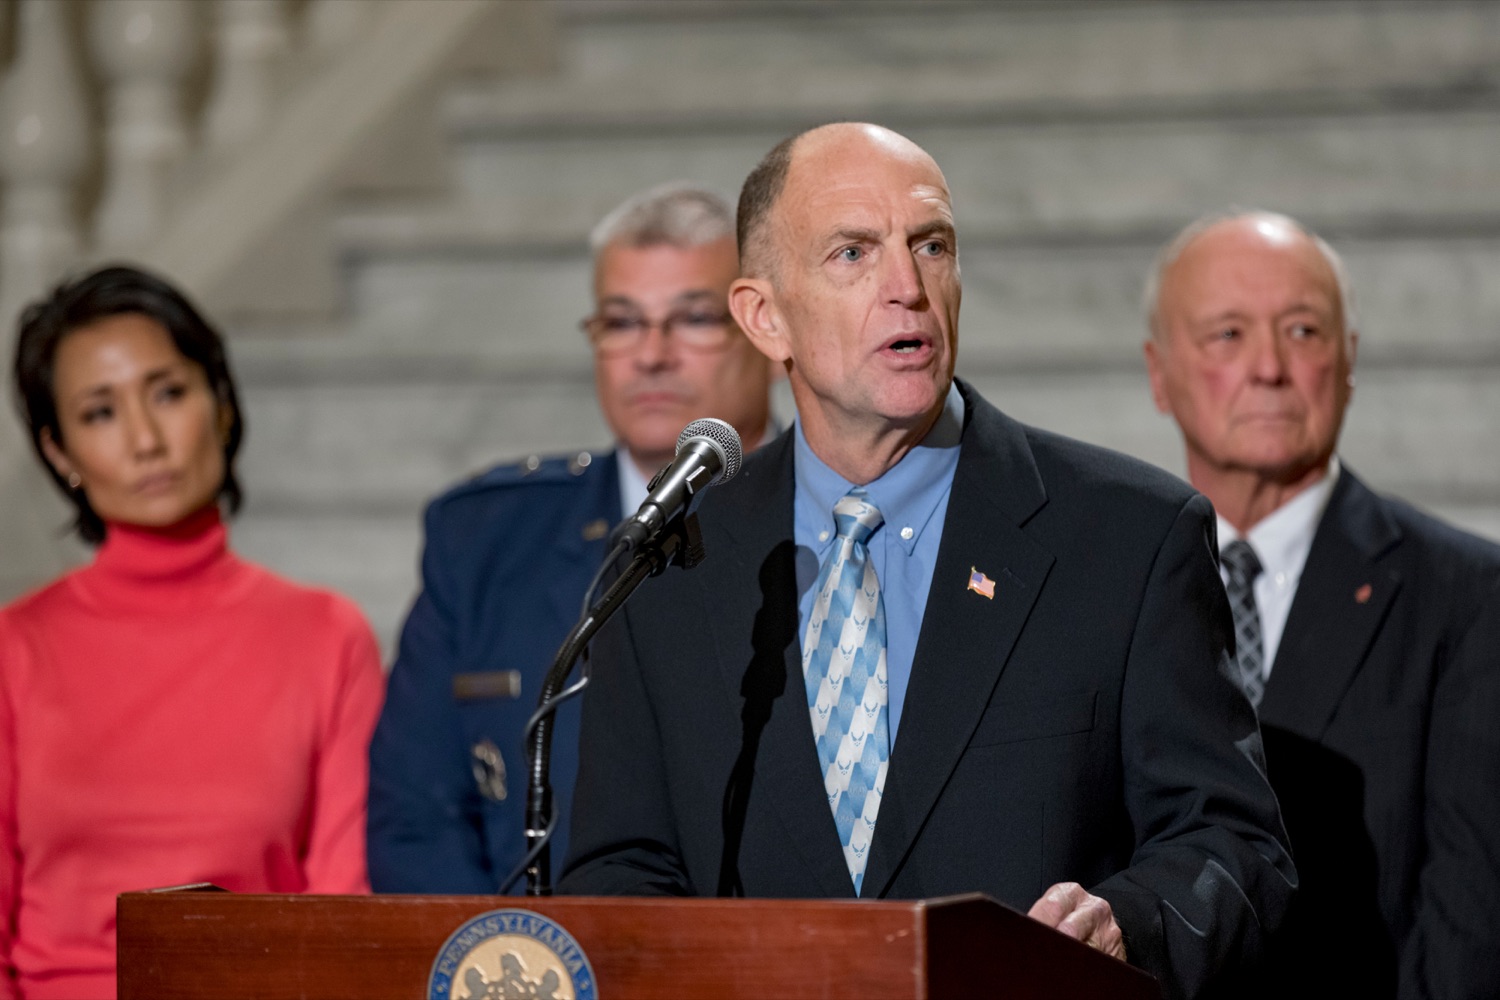 Lt. Gen. Ralph Jodice, USAF (Ret.),  speaks during a press conference outlining how competition for qualified individuals among all employment sectors affects military recruiting efforts and warrants greater investment in our next generation inside the Capitol Rotunda on Tuesday, November 12, 2019.<br><a href="https://filesource.amperwave.net/commonwealthofpa/photo/17588_GOV_Mission_Readiness_NK_022.JPG" target="_blank">⇣ Download Photo</a>